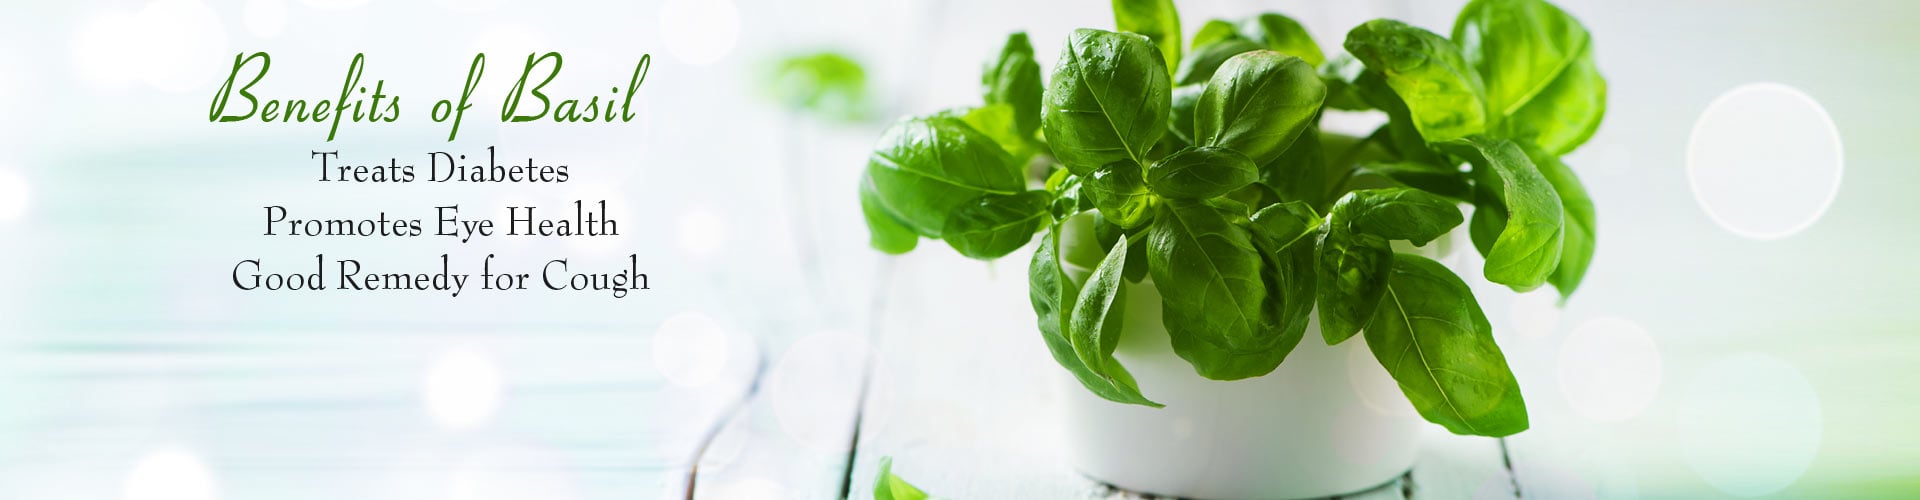 Benefits of Basil - Treats Diabetes, Promotes Eye Health, Good Remedy for Cough